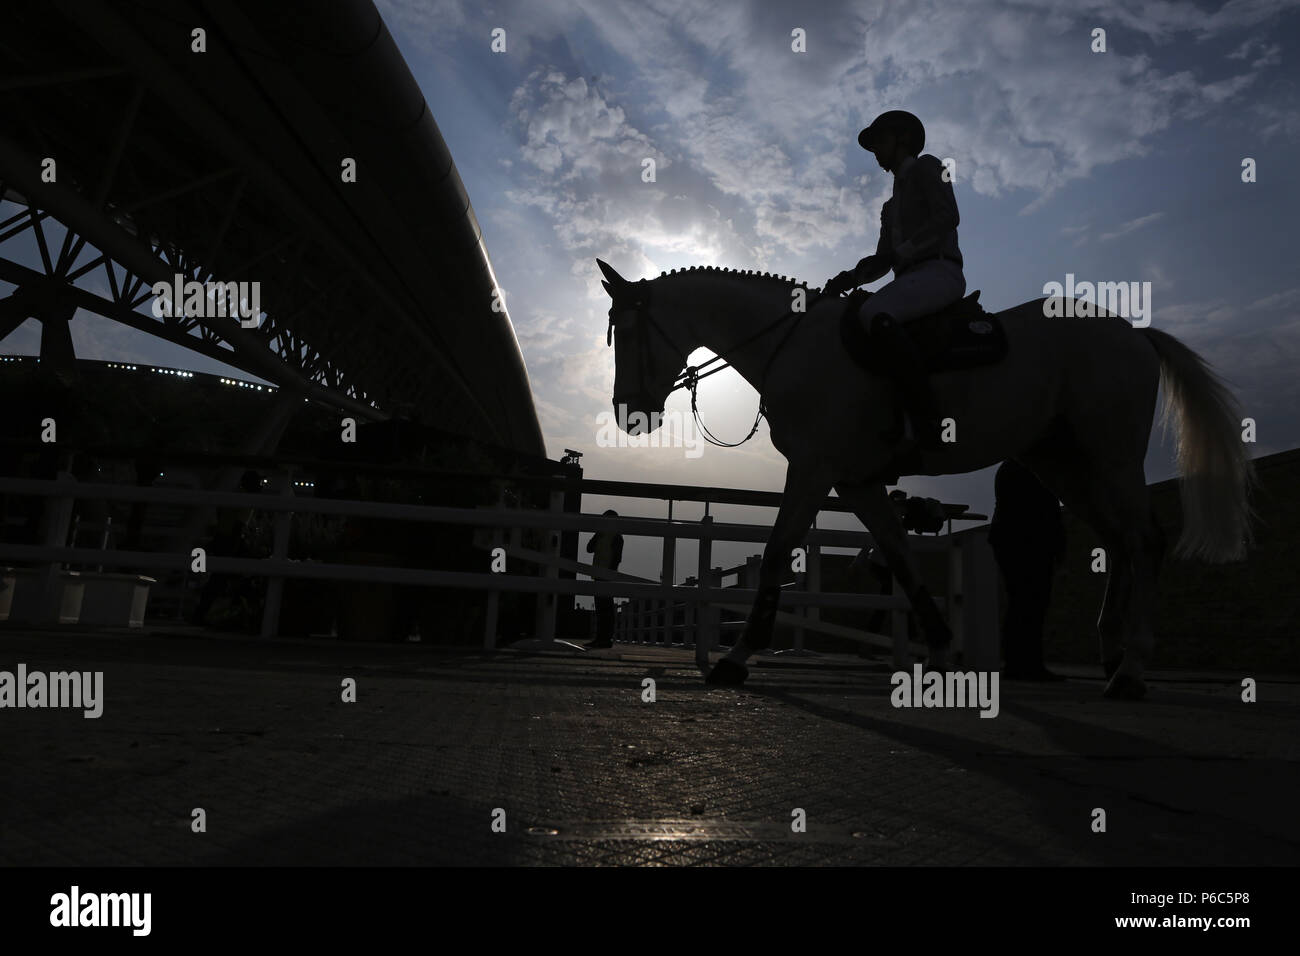 Doha, silhouette of horse and show jumper on entry into the riding track Stock Photo